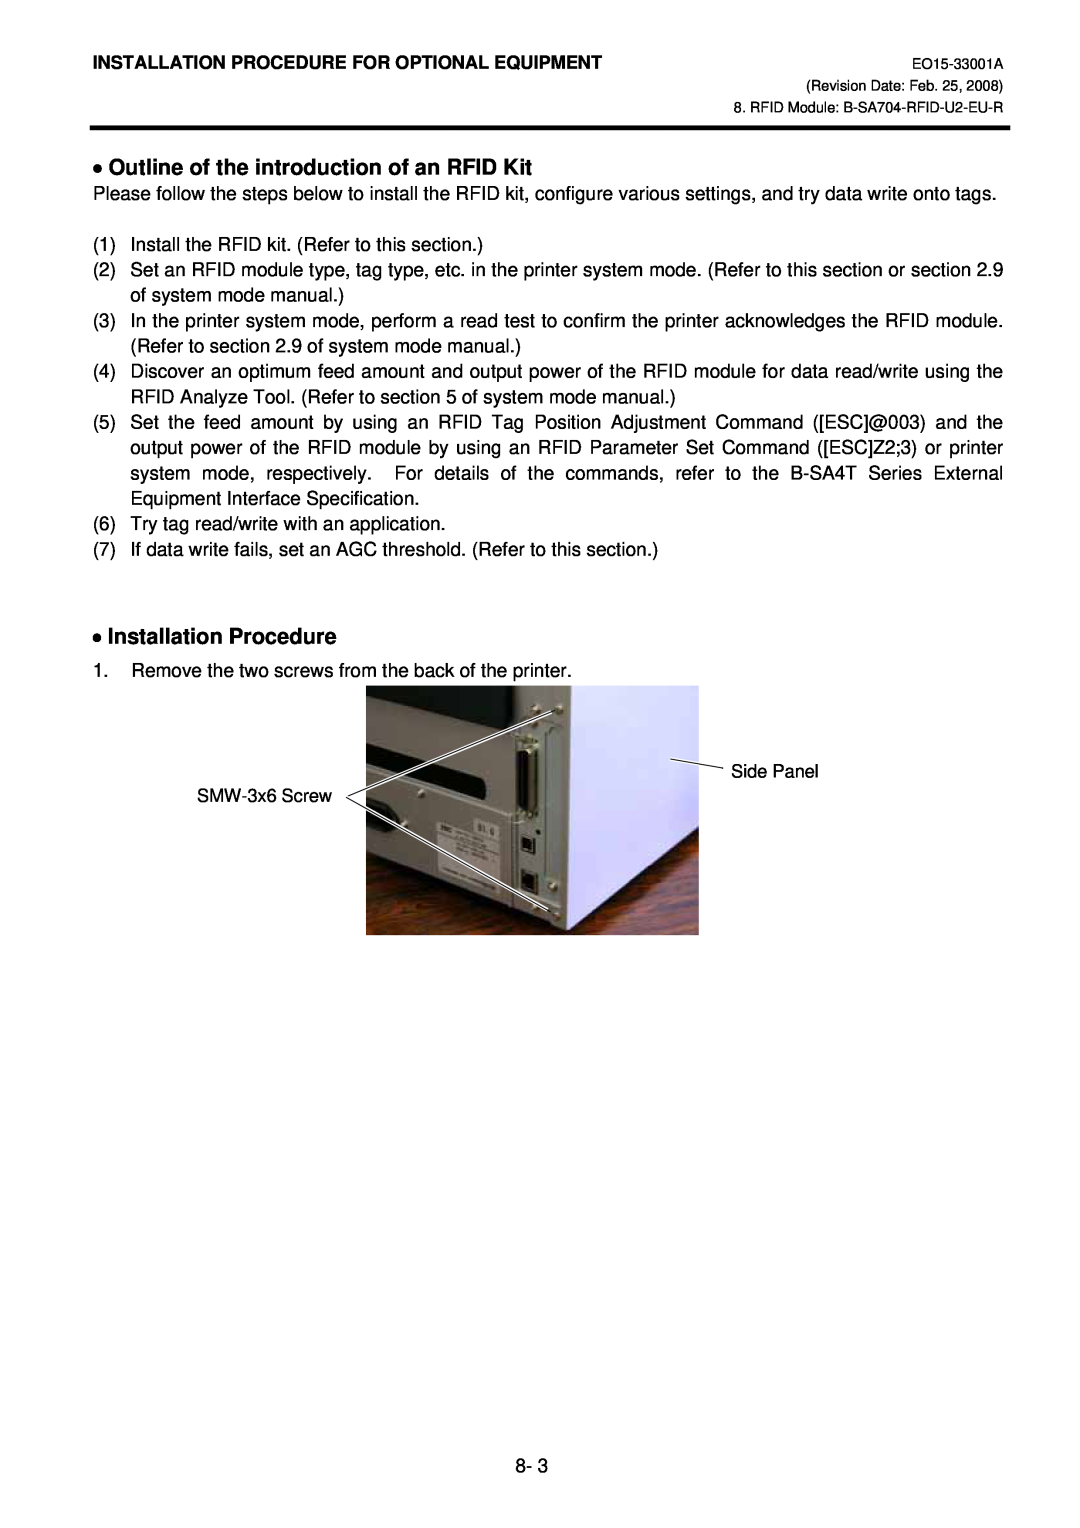 Toshiba B-SA4T Outline of the introduction of an RFID Kit, Installation Procedure, Side Panel SMW-3x6 Screw 